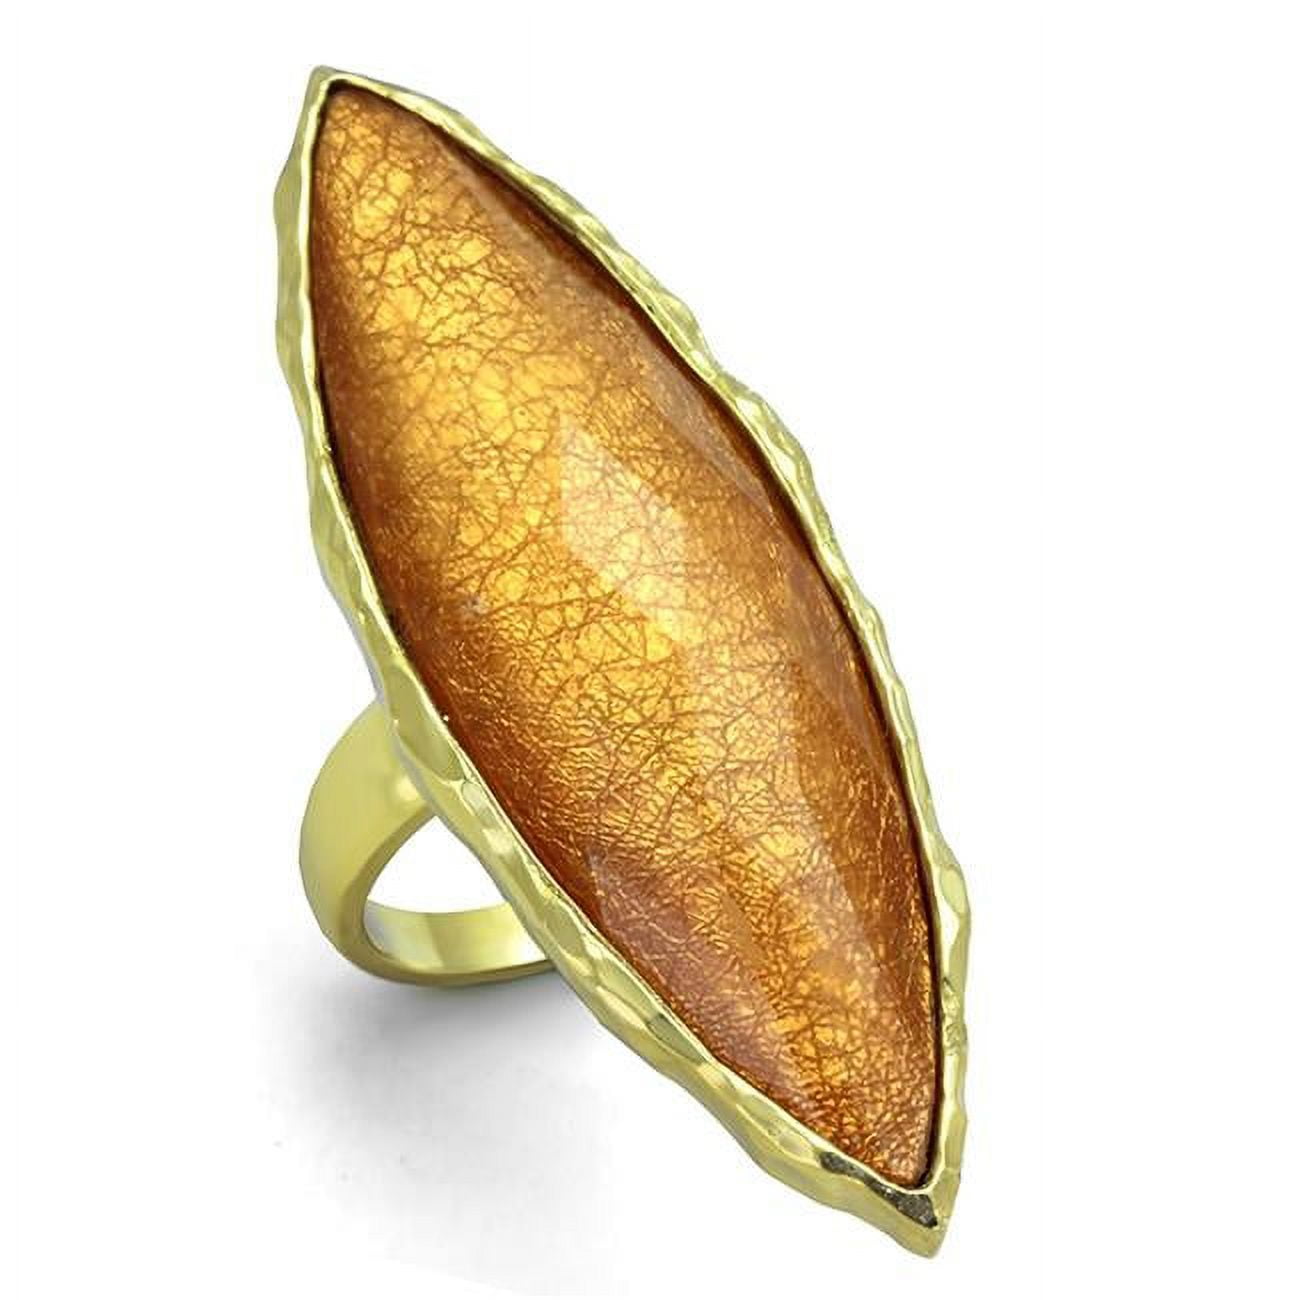 Precious Stone Women IP Gold Stainless Steel Ring with Synthetic in Orange - Size 7